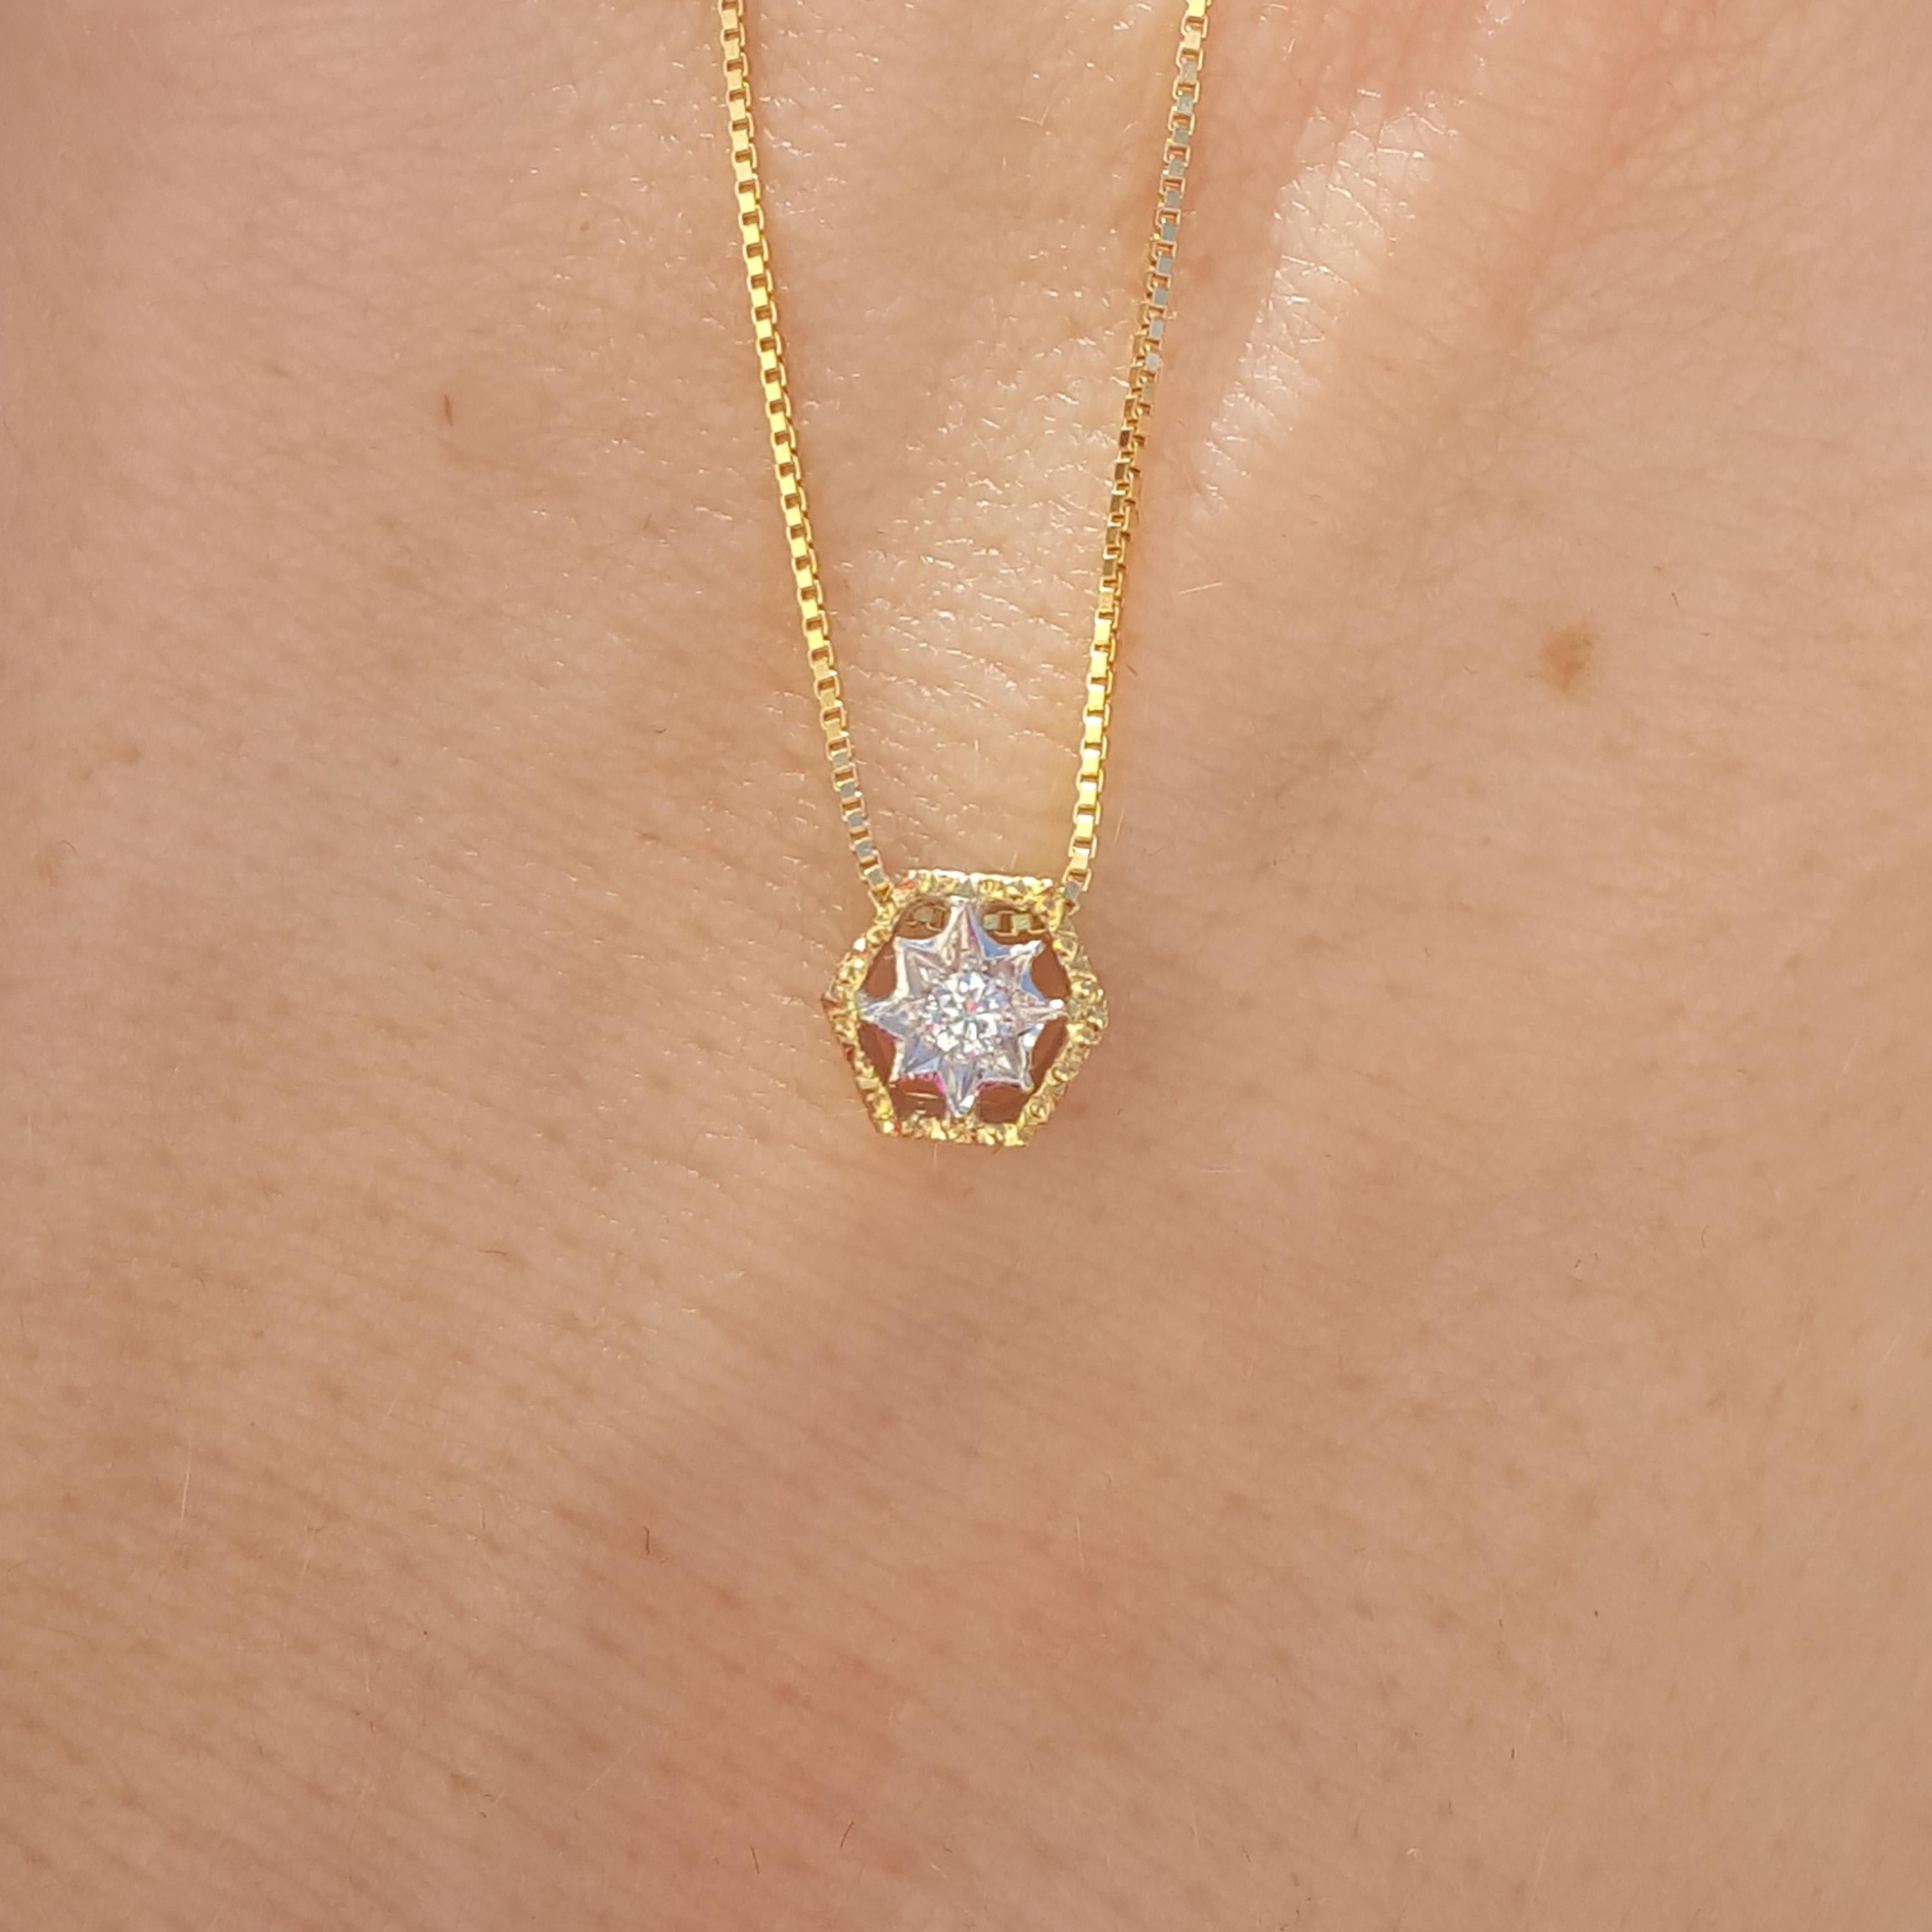 This darling little Honeycomb Necklace is the perfect little piece of Italy to wear by itself or as part of a layered look. Honeycomb is an utterly modern style adapted from generations of Florentine engraved design and elegance.

-0.04ct